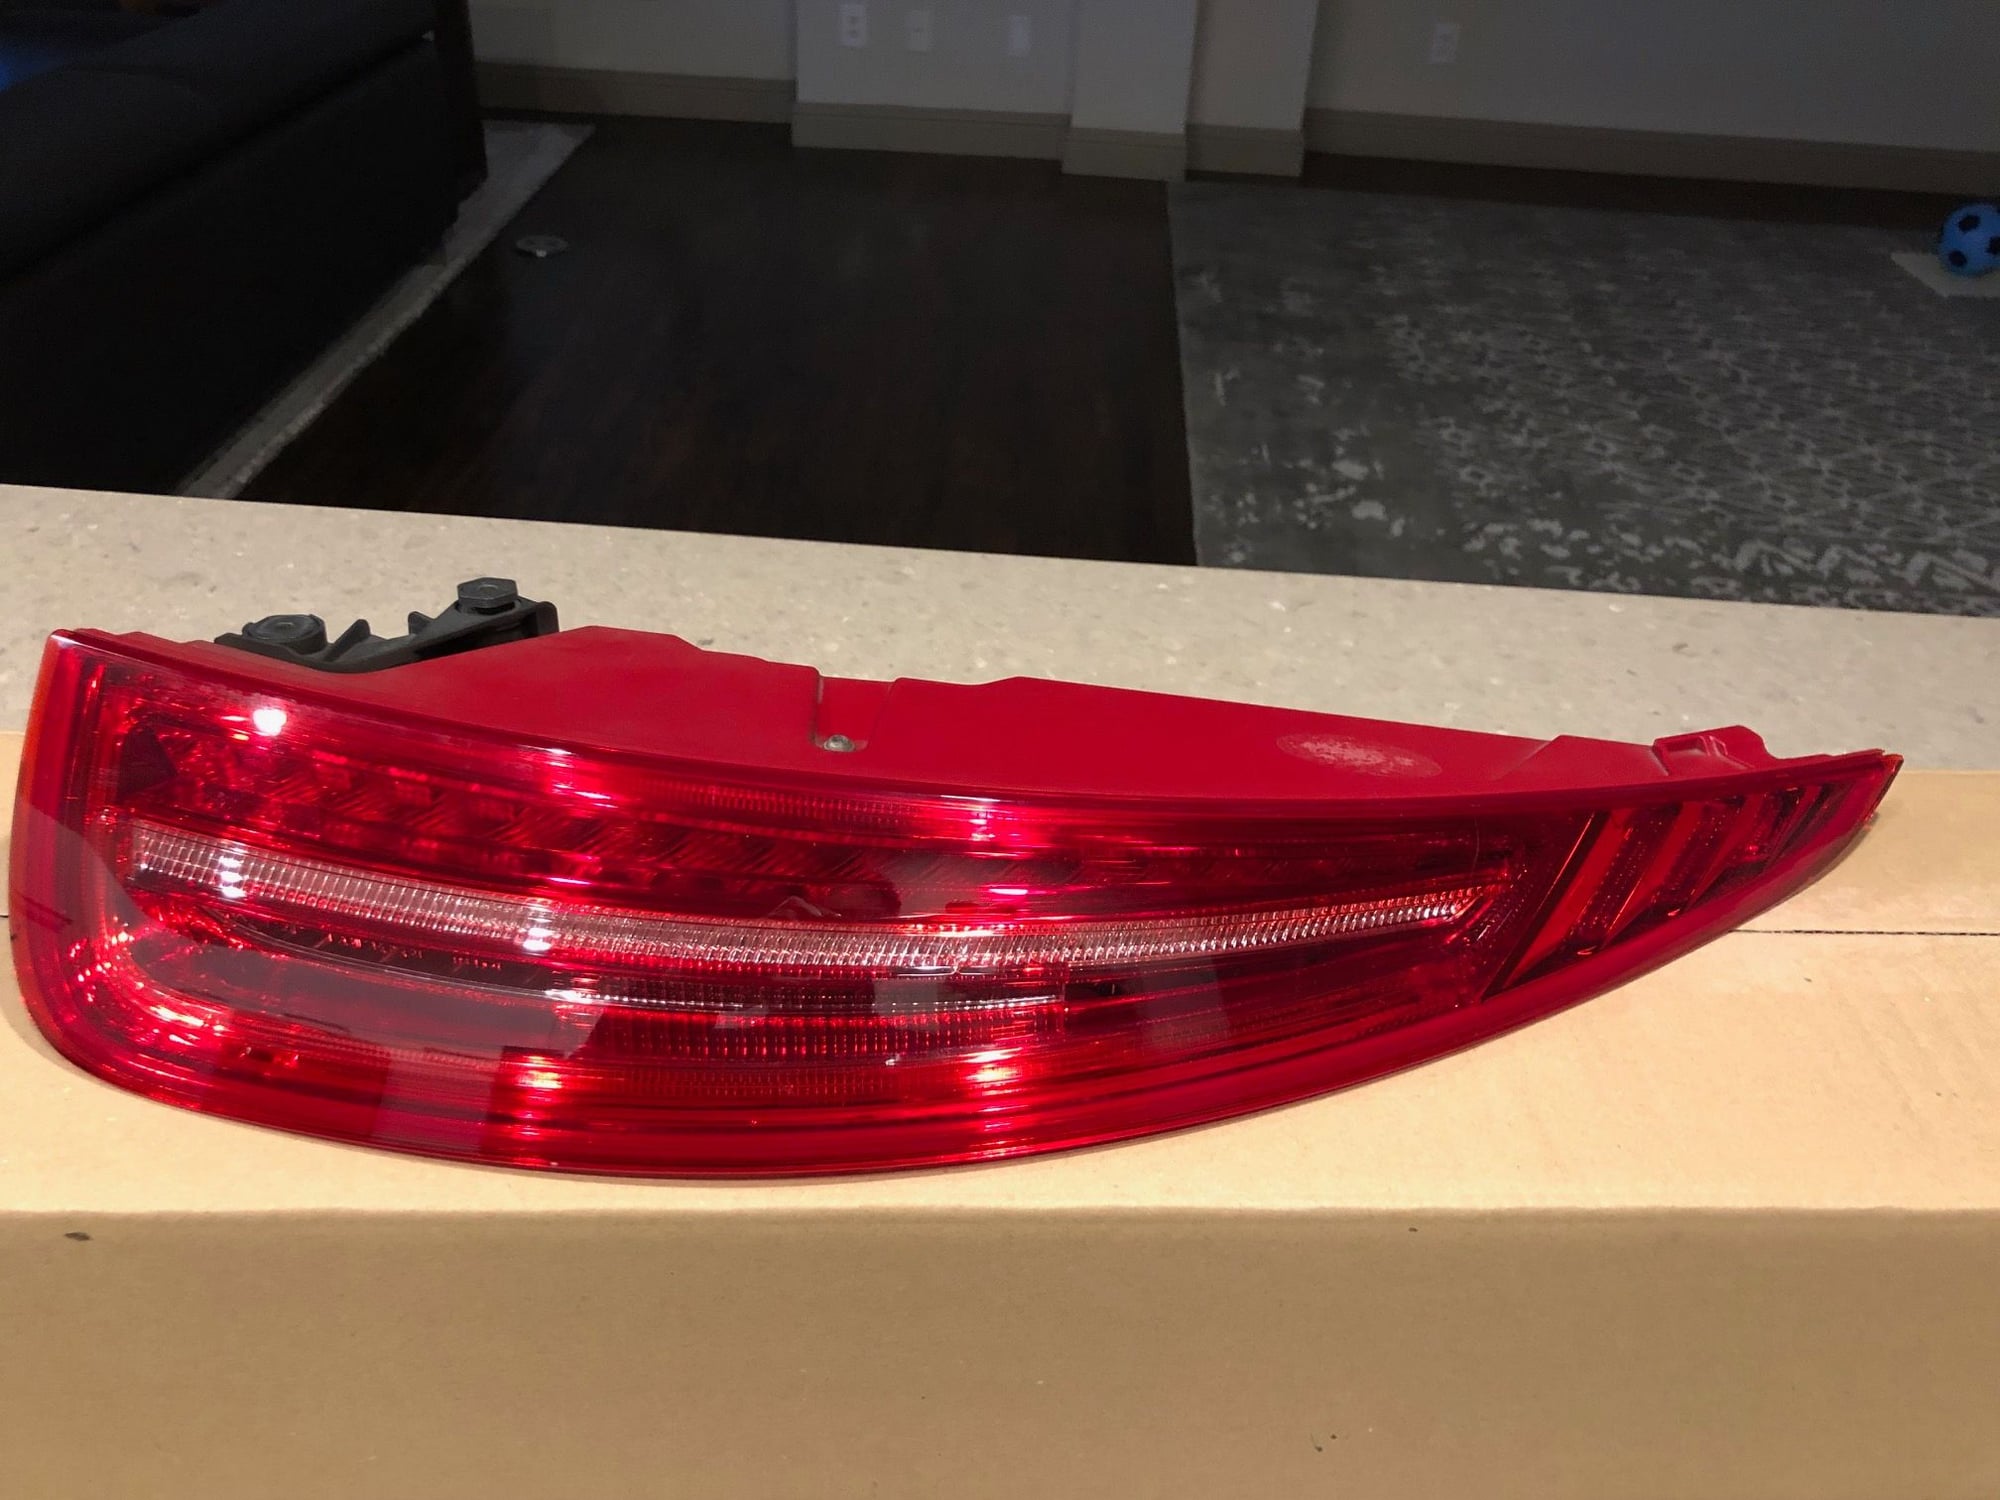 Lights - Passanger side LED Tail Light - Used - 2011 to 2019 Porsche 911 - Dallas, TX 75204, United States